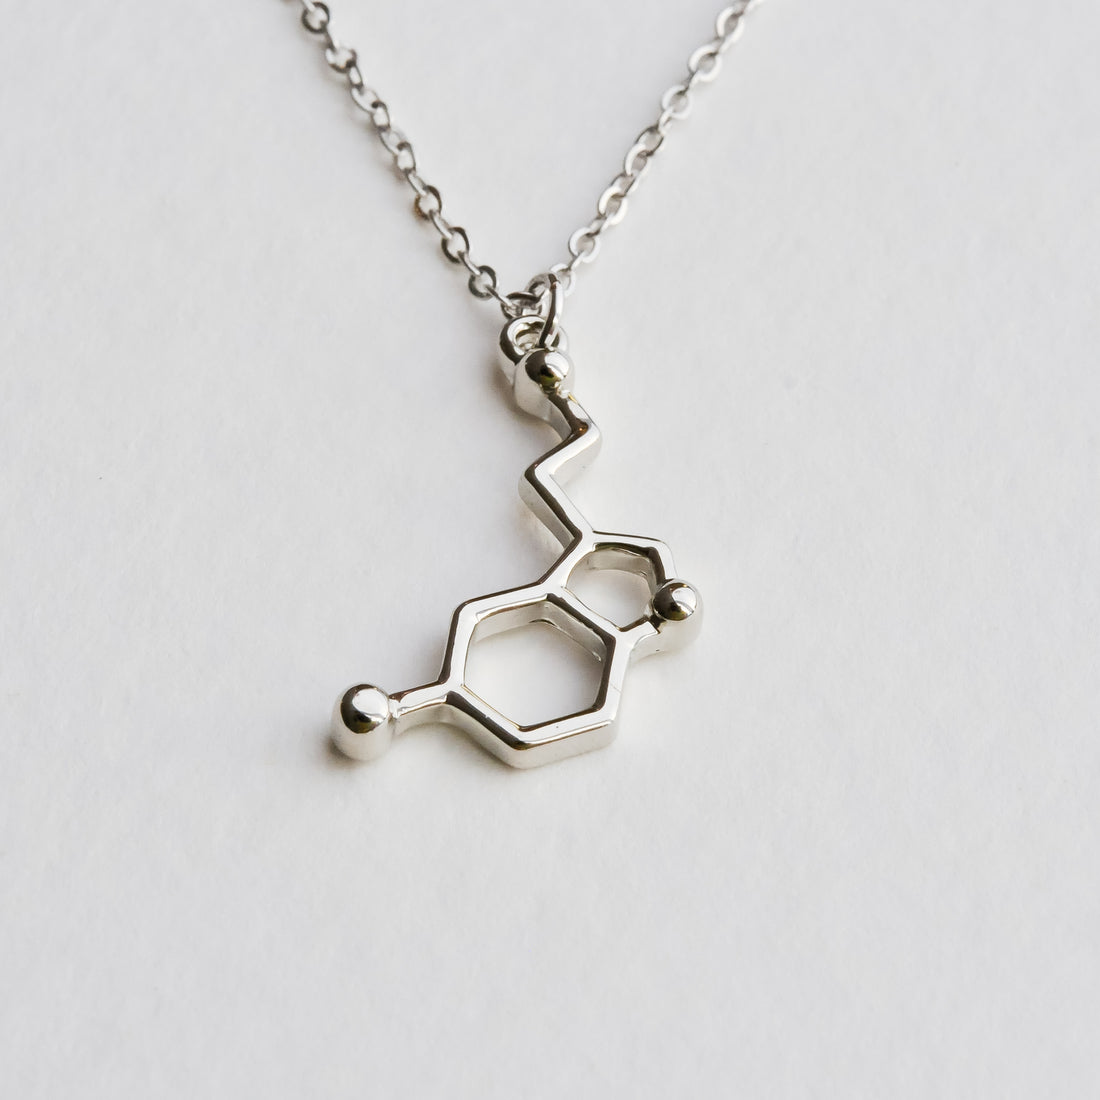 Jewelry for Science!